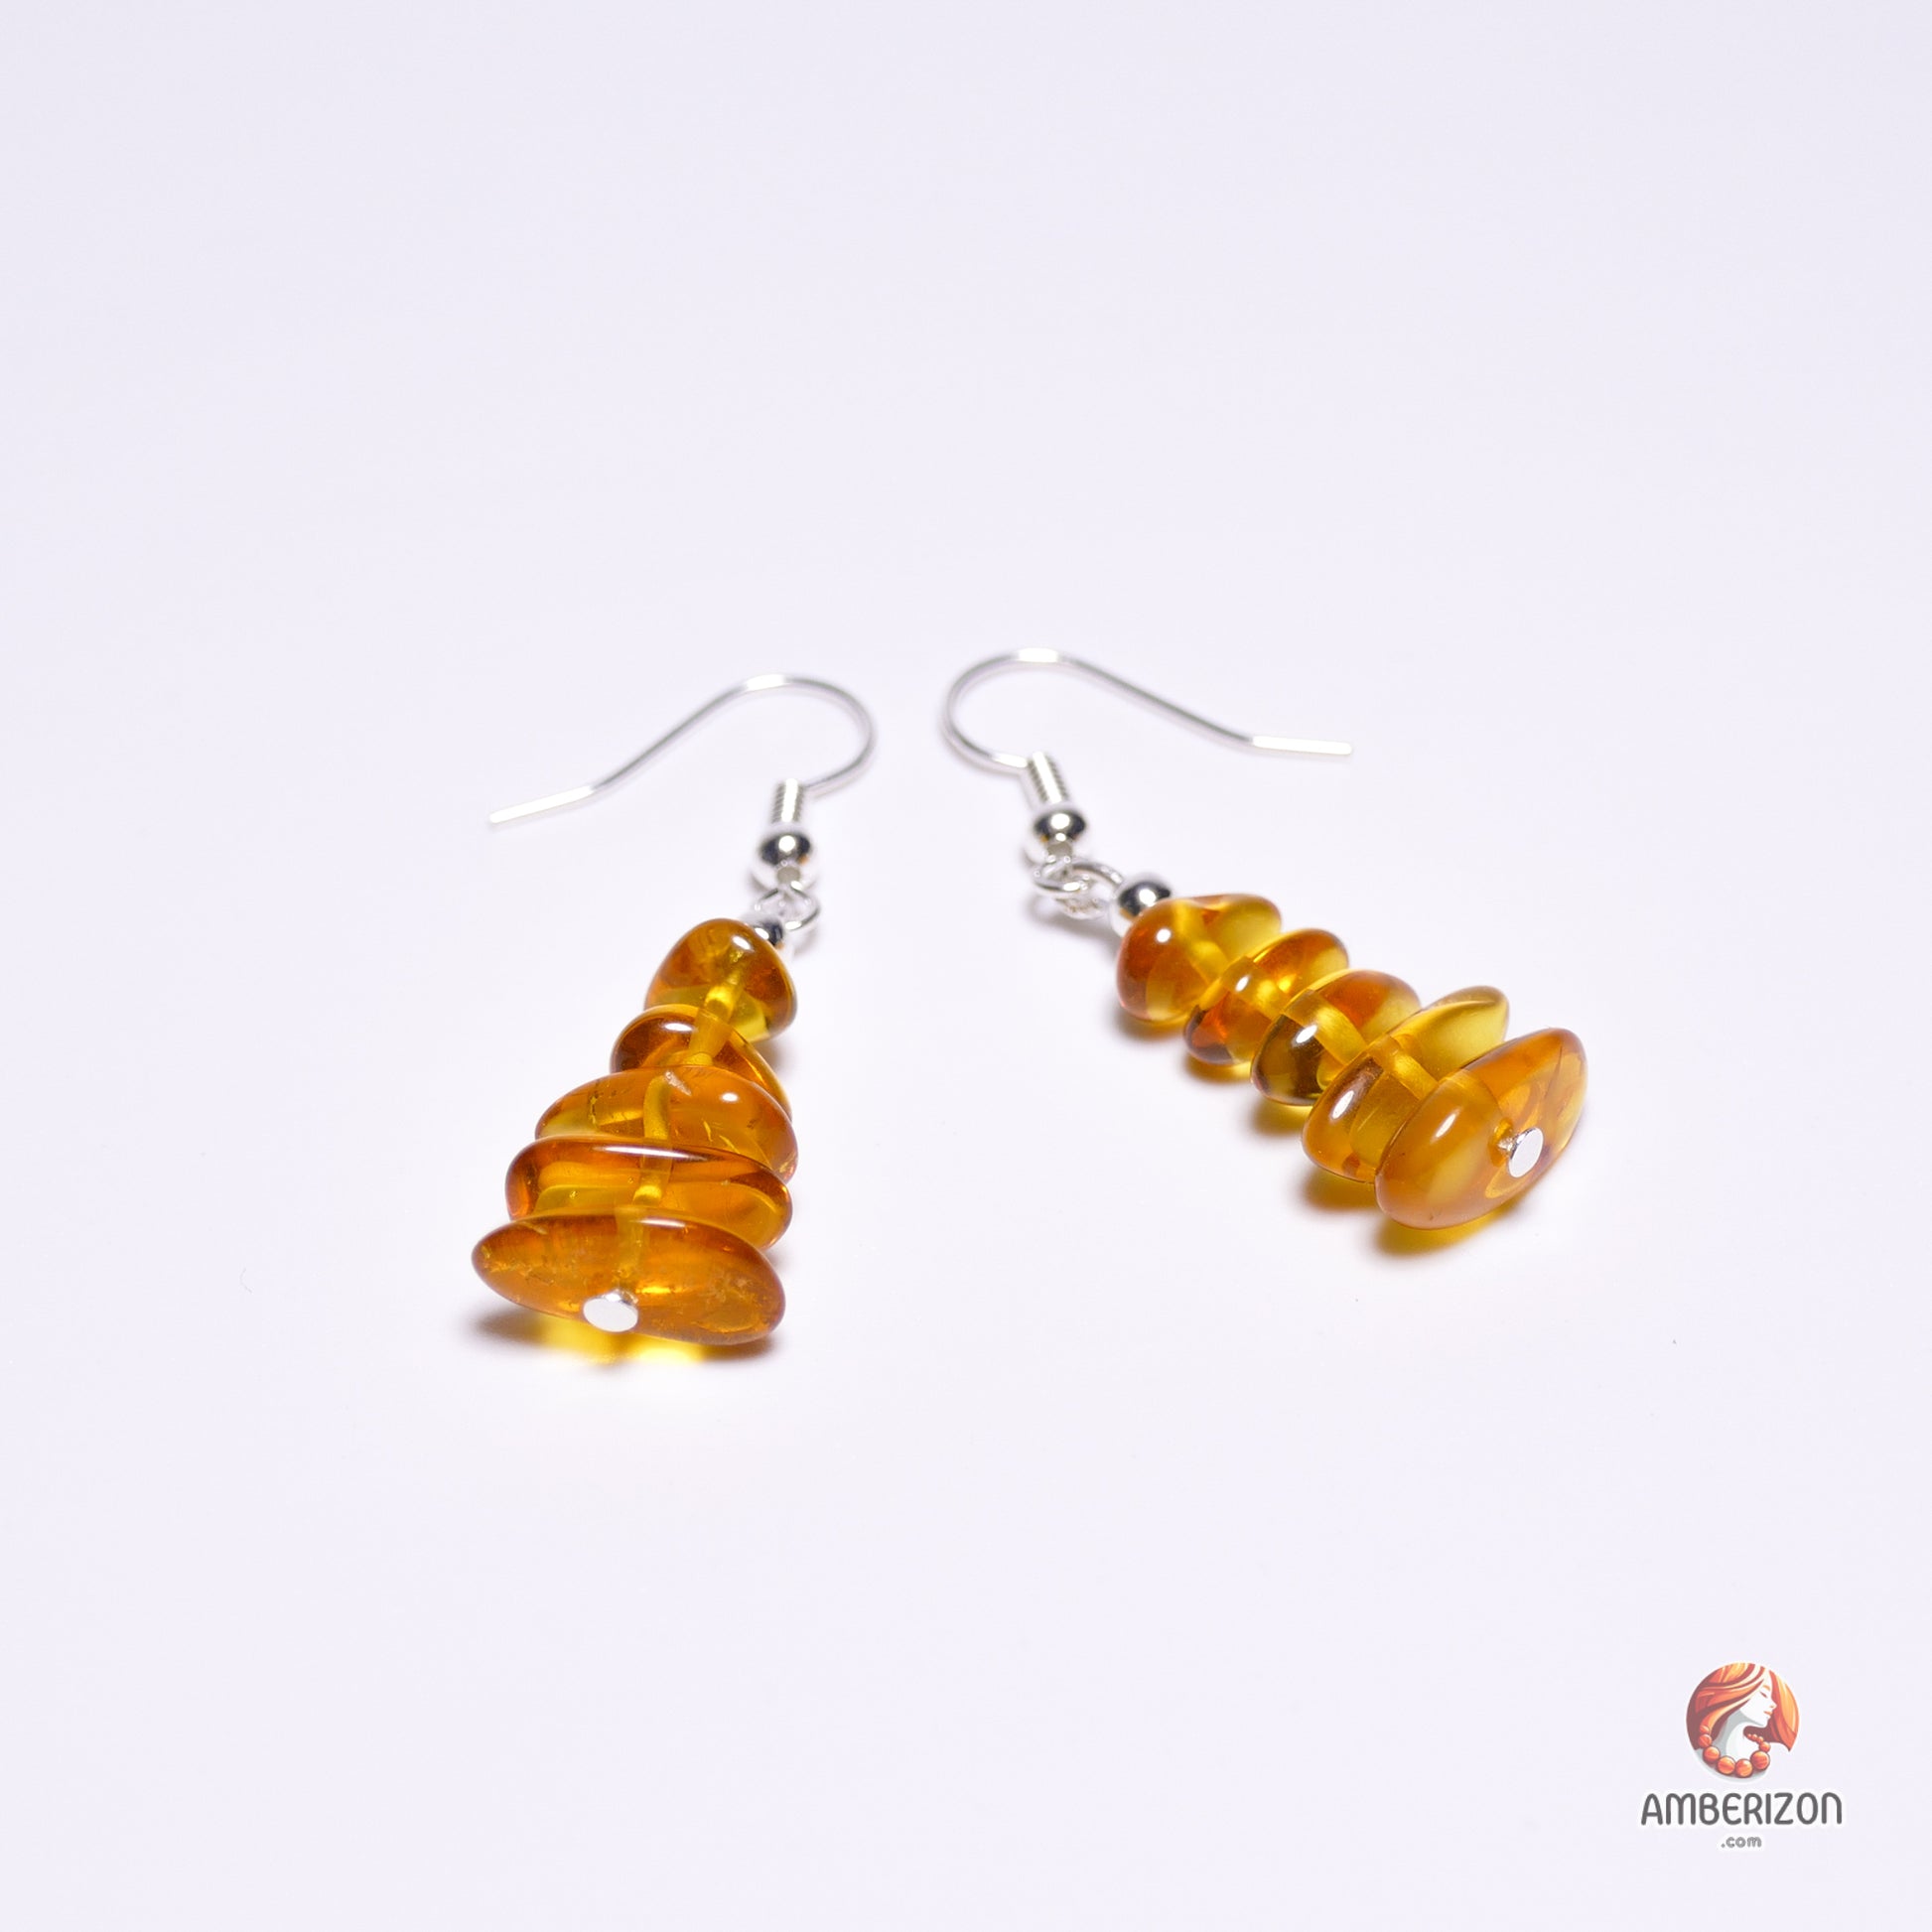 Baltic amber chip earrings - Smooth translucent beads